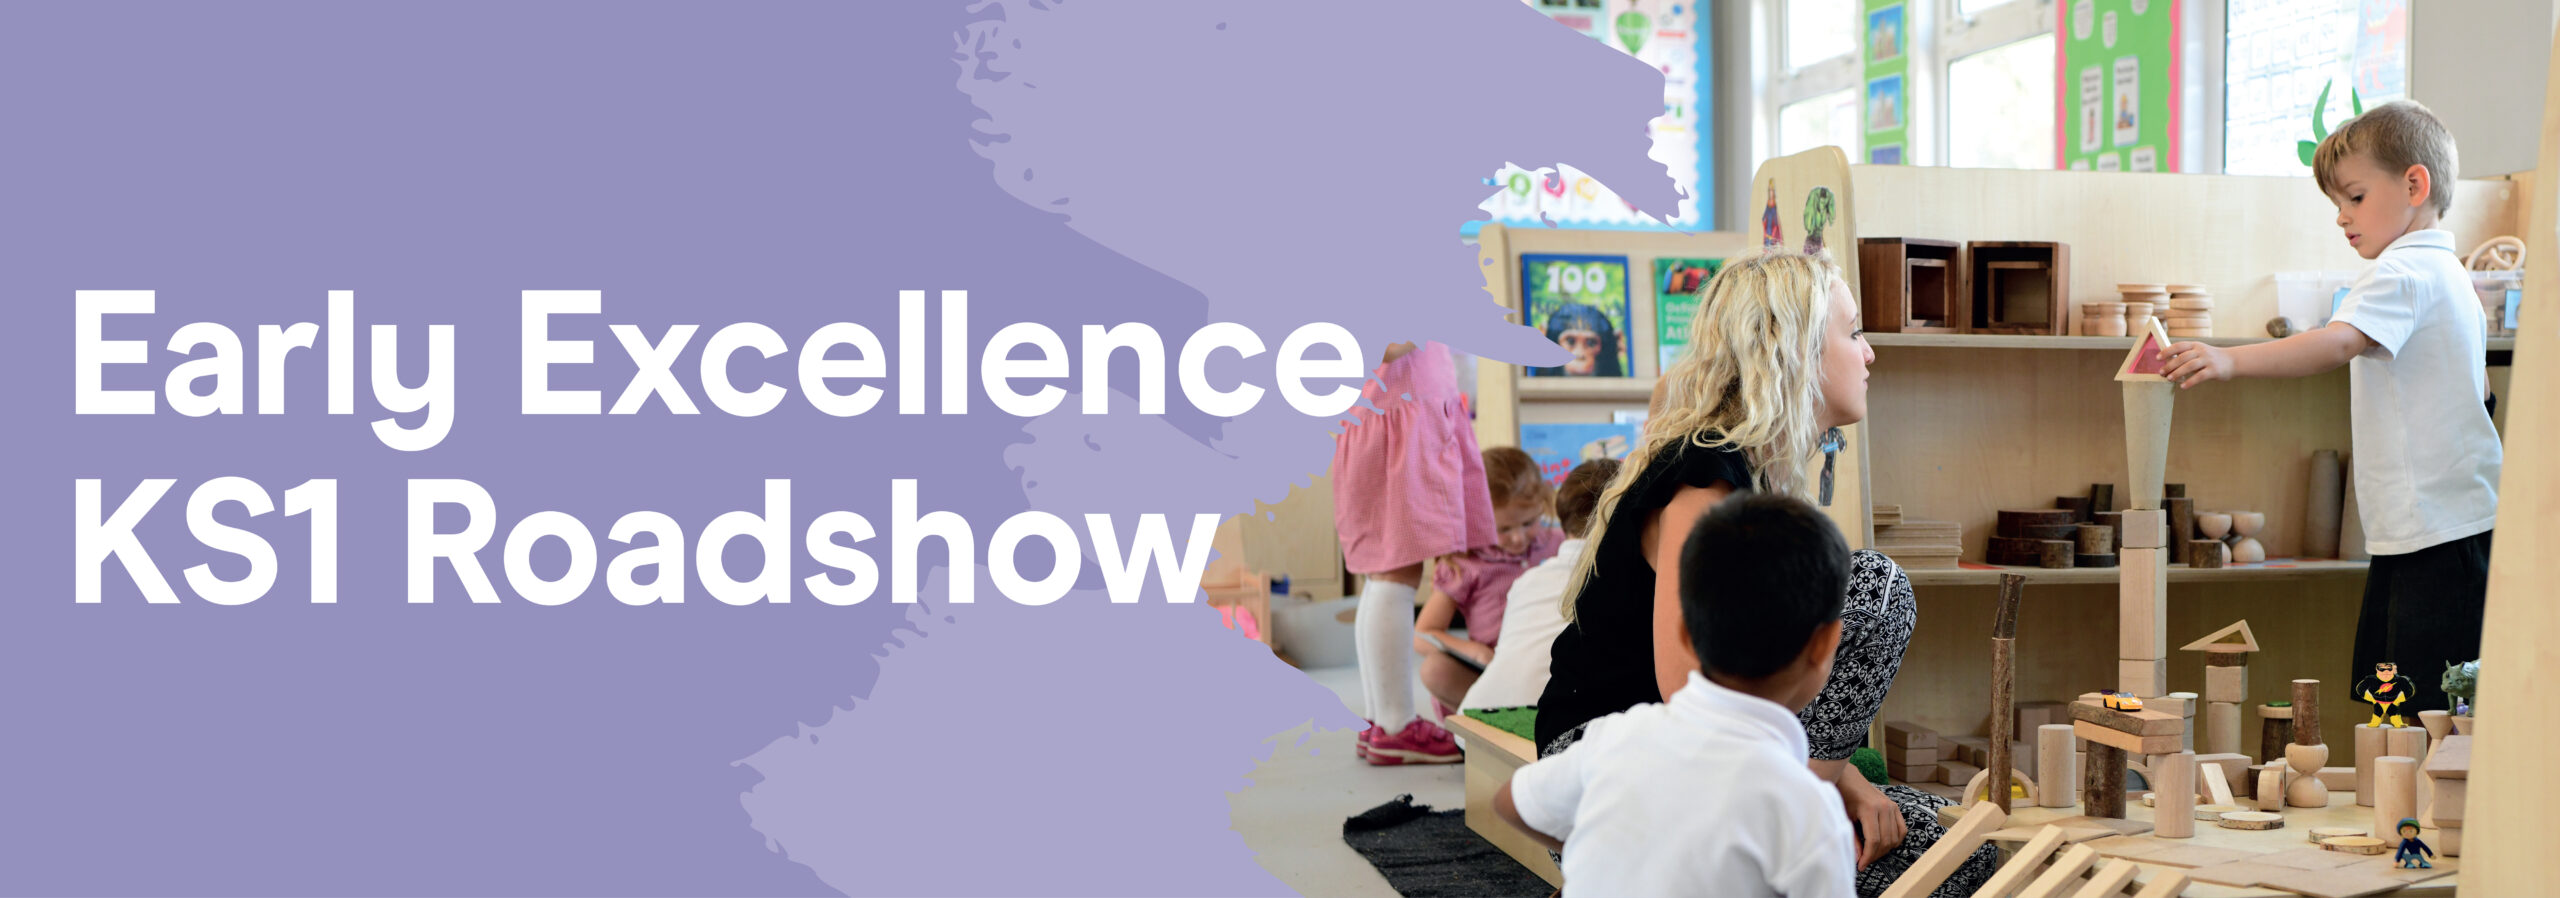 Early Excellence KS1 Roadshow Banner